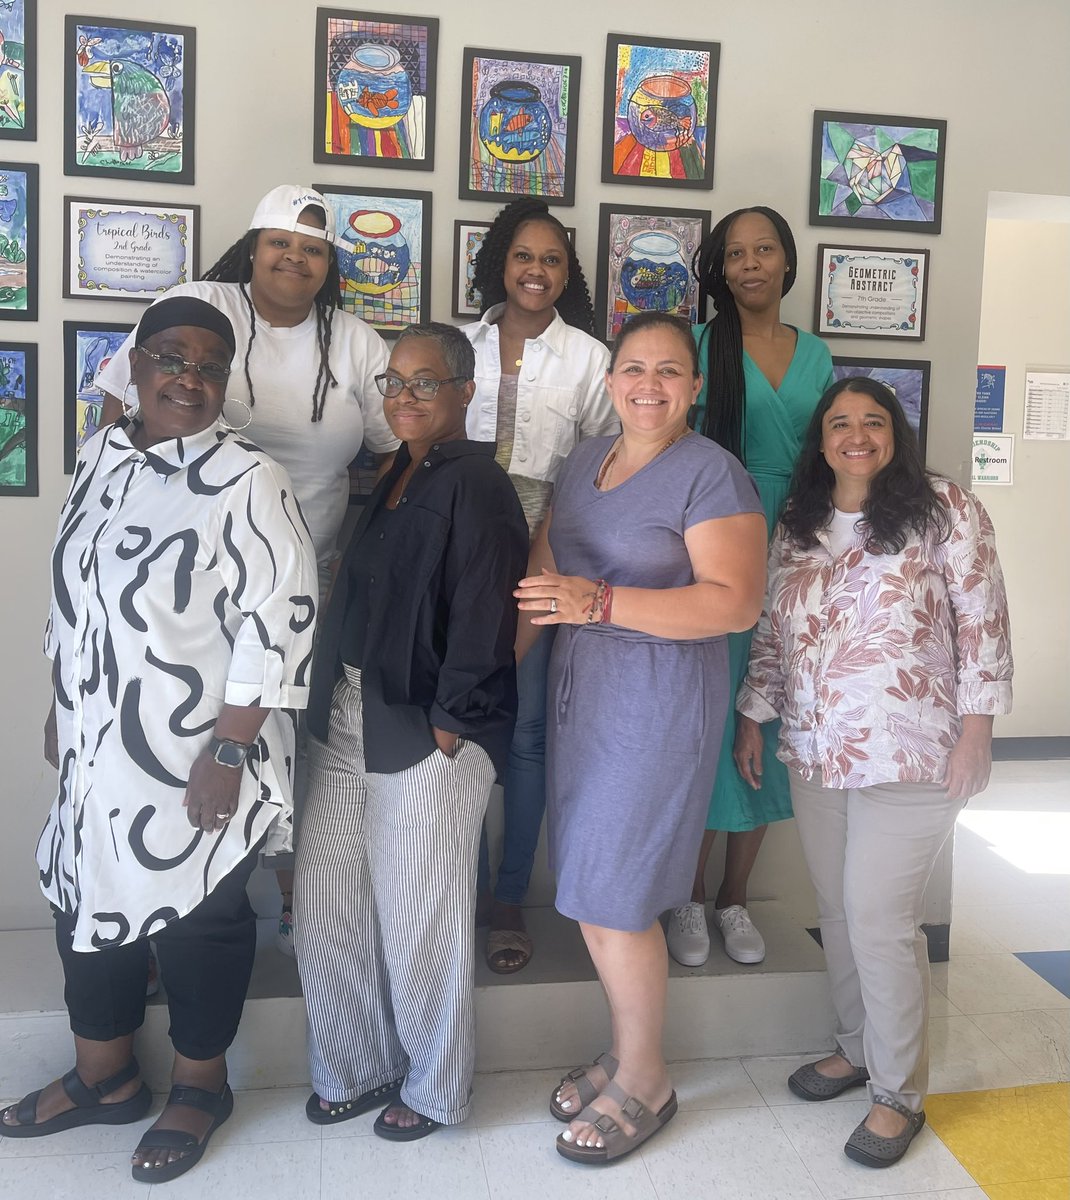 Armstrong ECE is getting ready for 2023-2024 school year.  #FPCSARM
#ArmstrongWolfPack
#AllTheWayUp
#AllStarVibes
#ItsAFriendshipRenaissance
#WorldClassEducation
#OneFriendship
#JourneyTo30